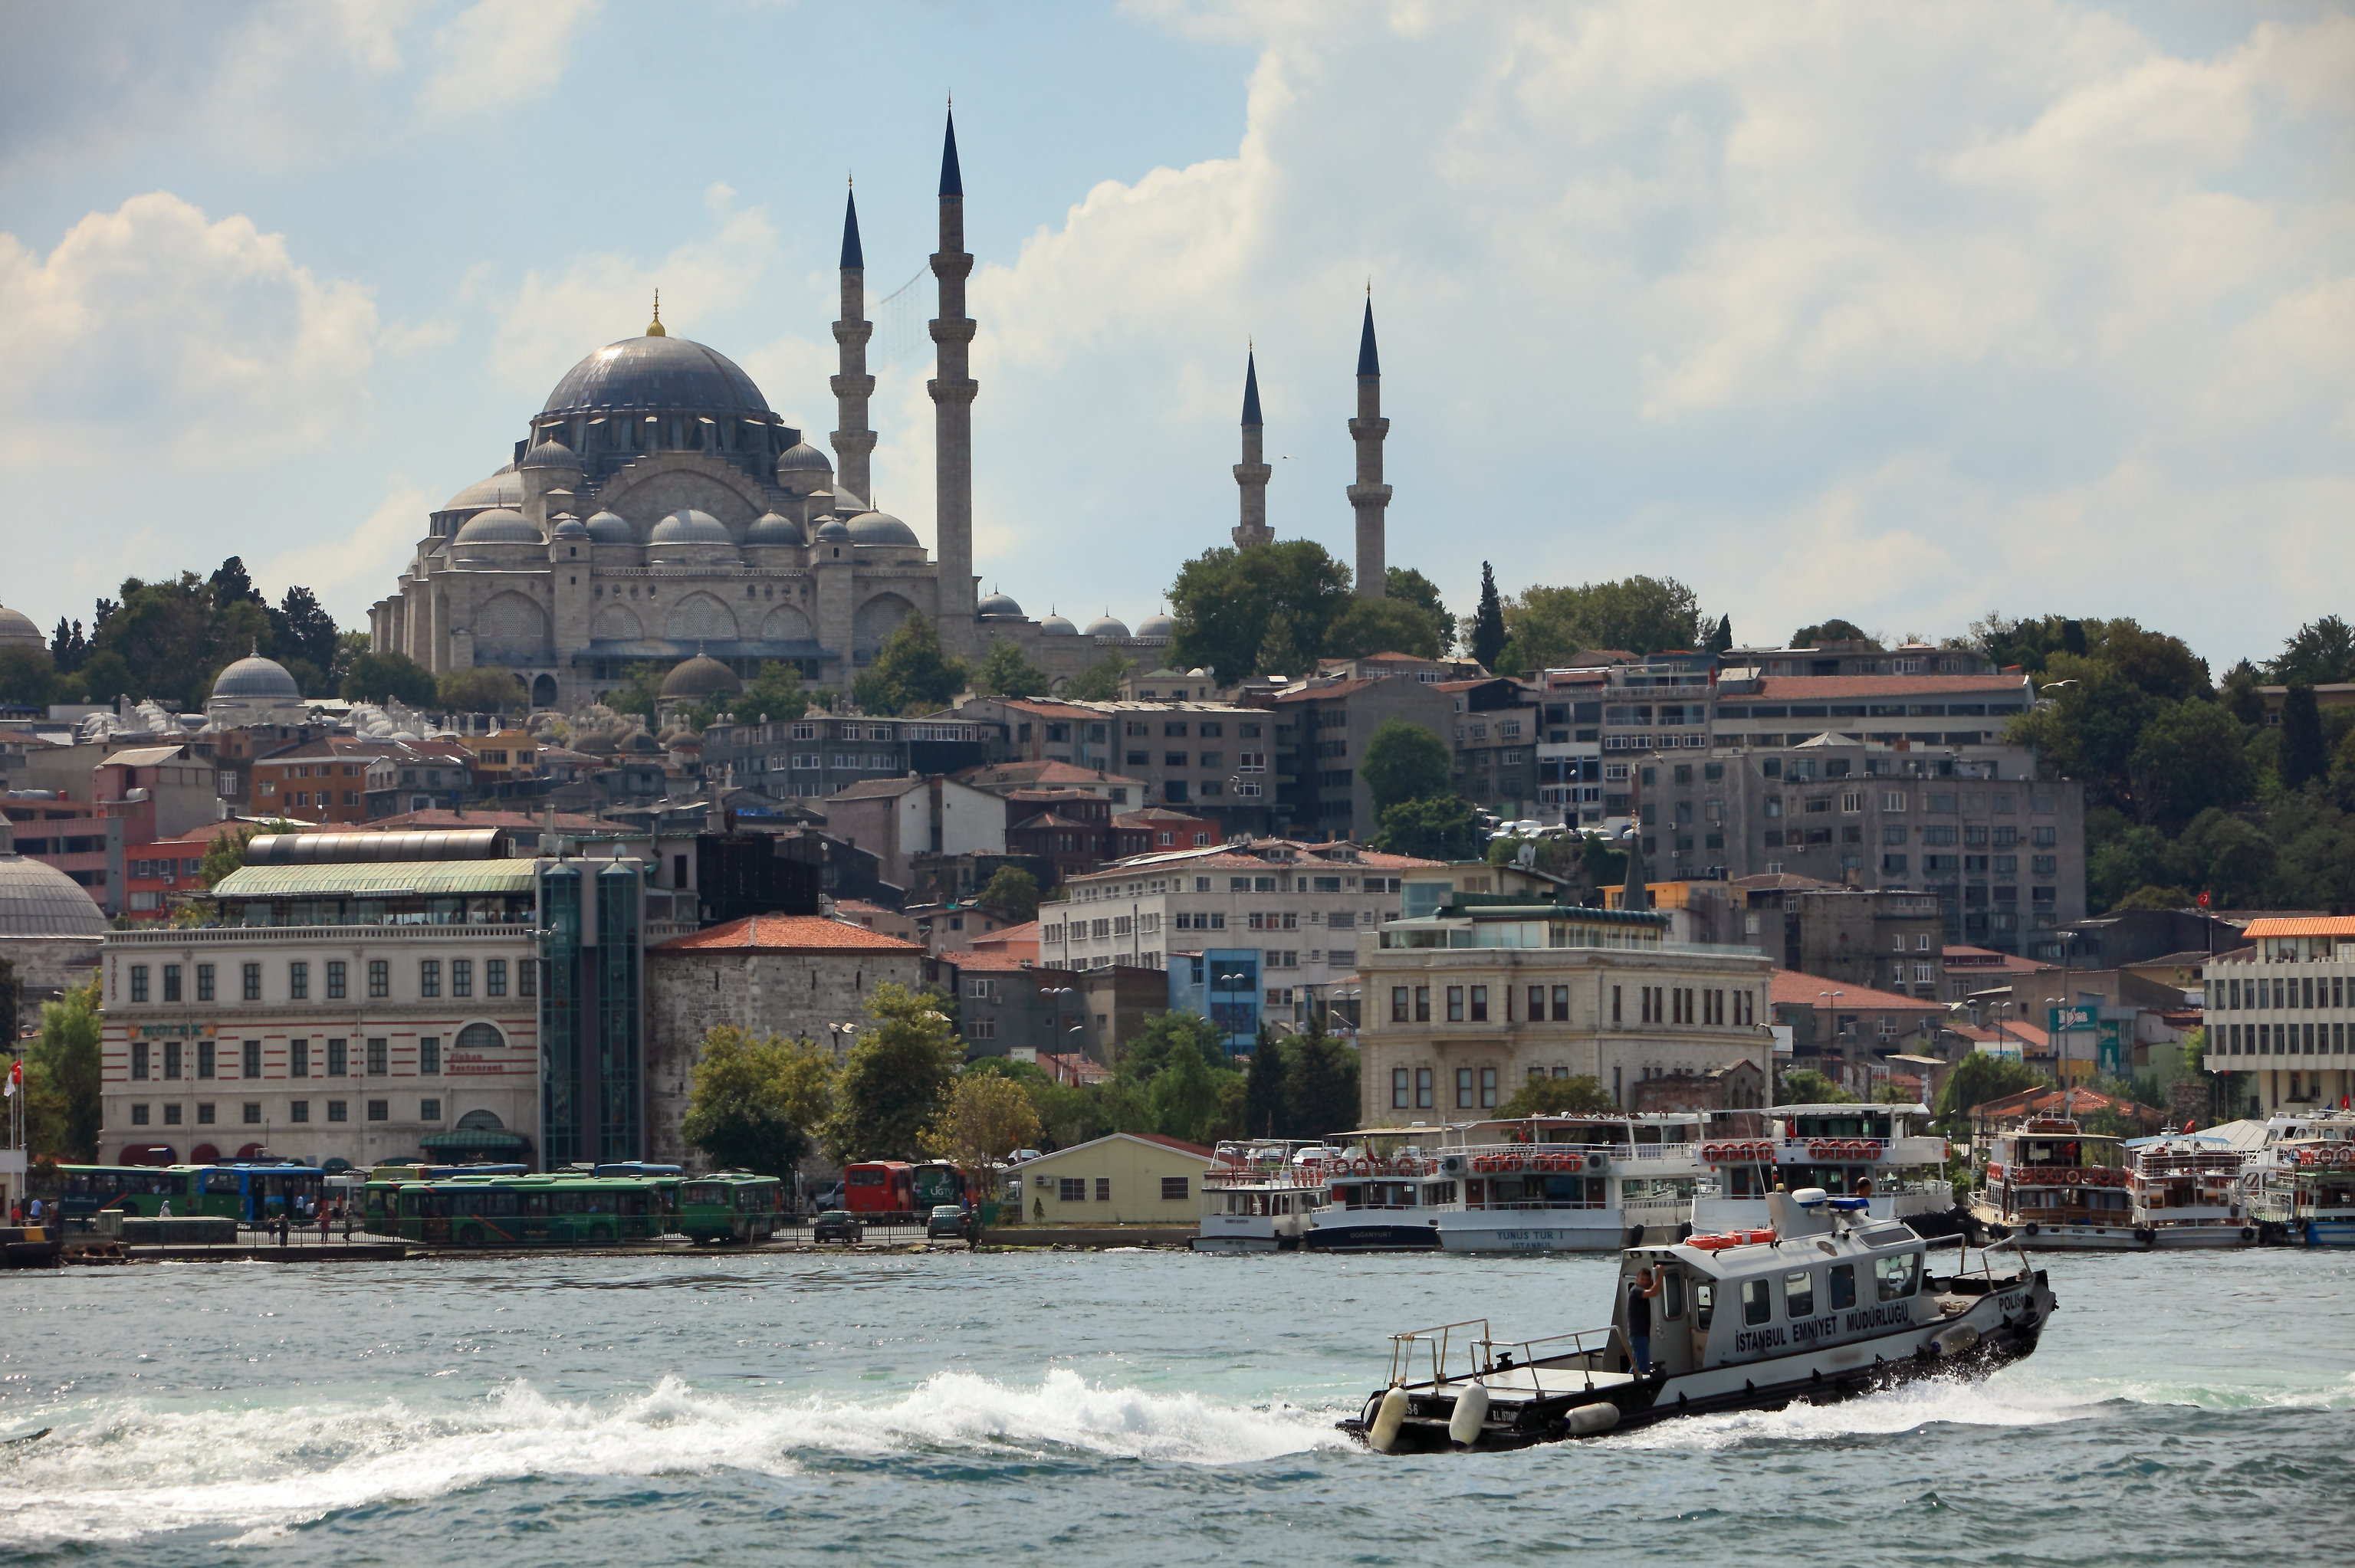 View of the Blue Mosque across the Bosphorus, Istanbul